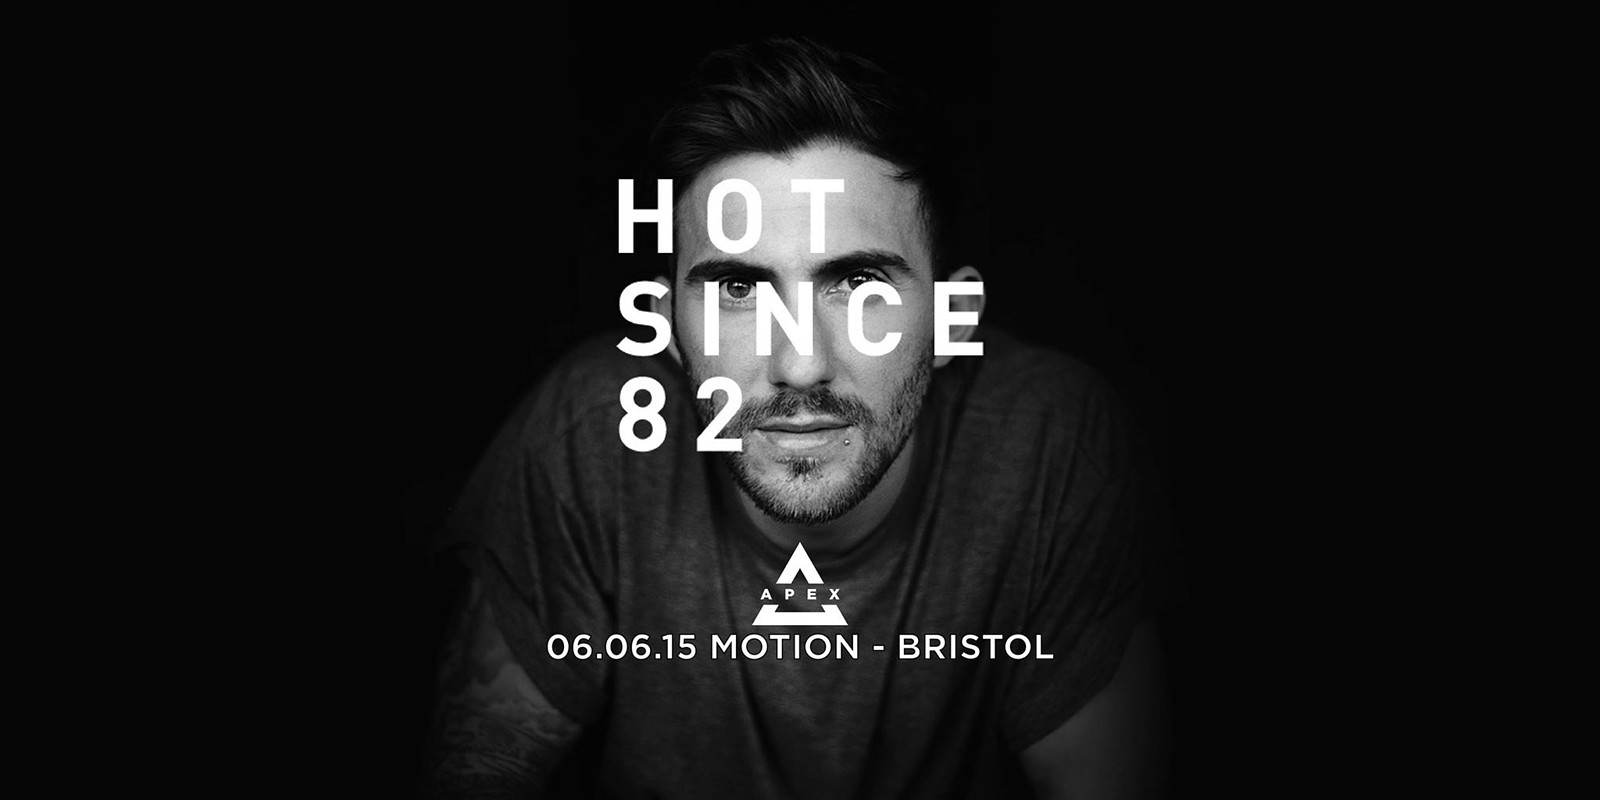 Hot since. Hot since 82. Hot since 82 биография. Hot since 82 Recovery.